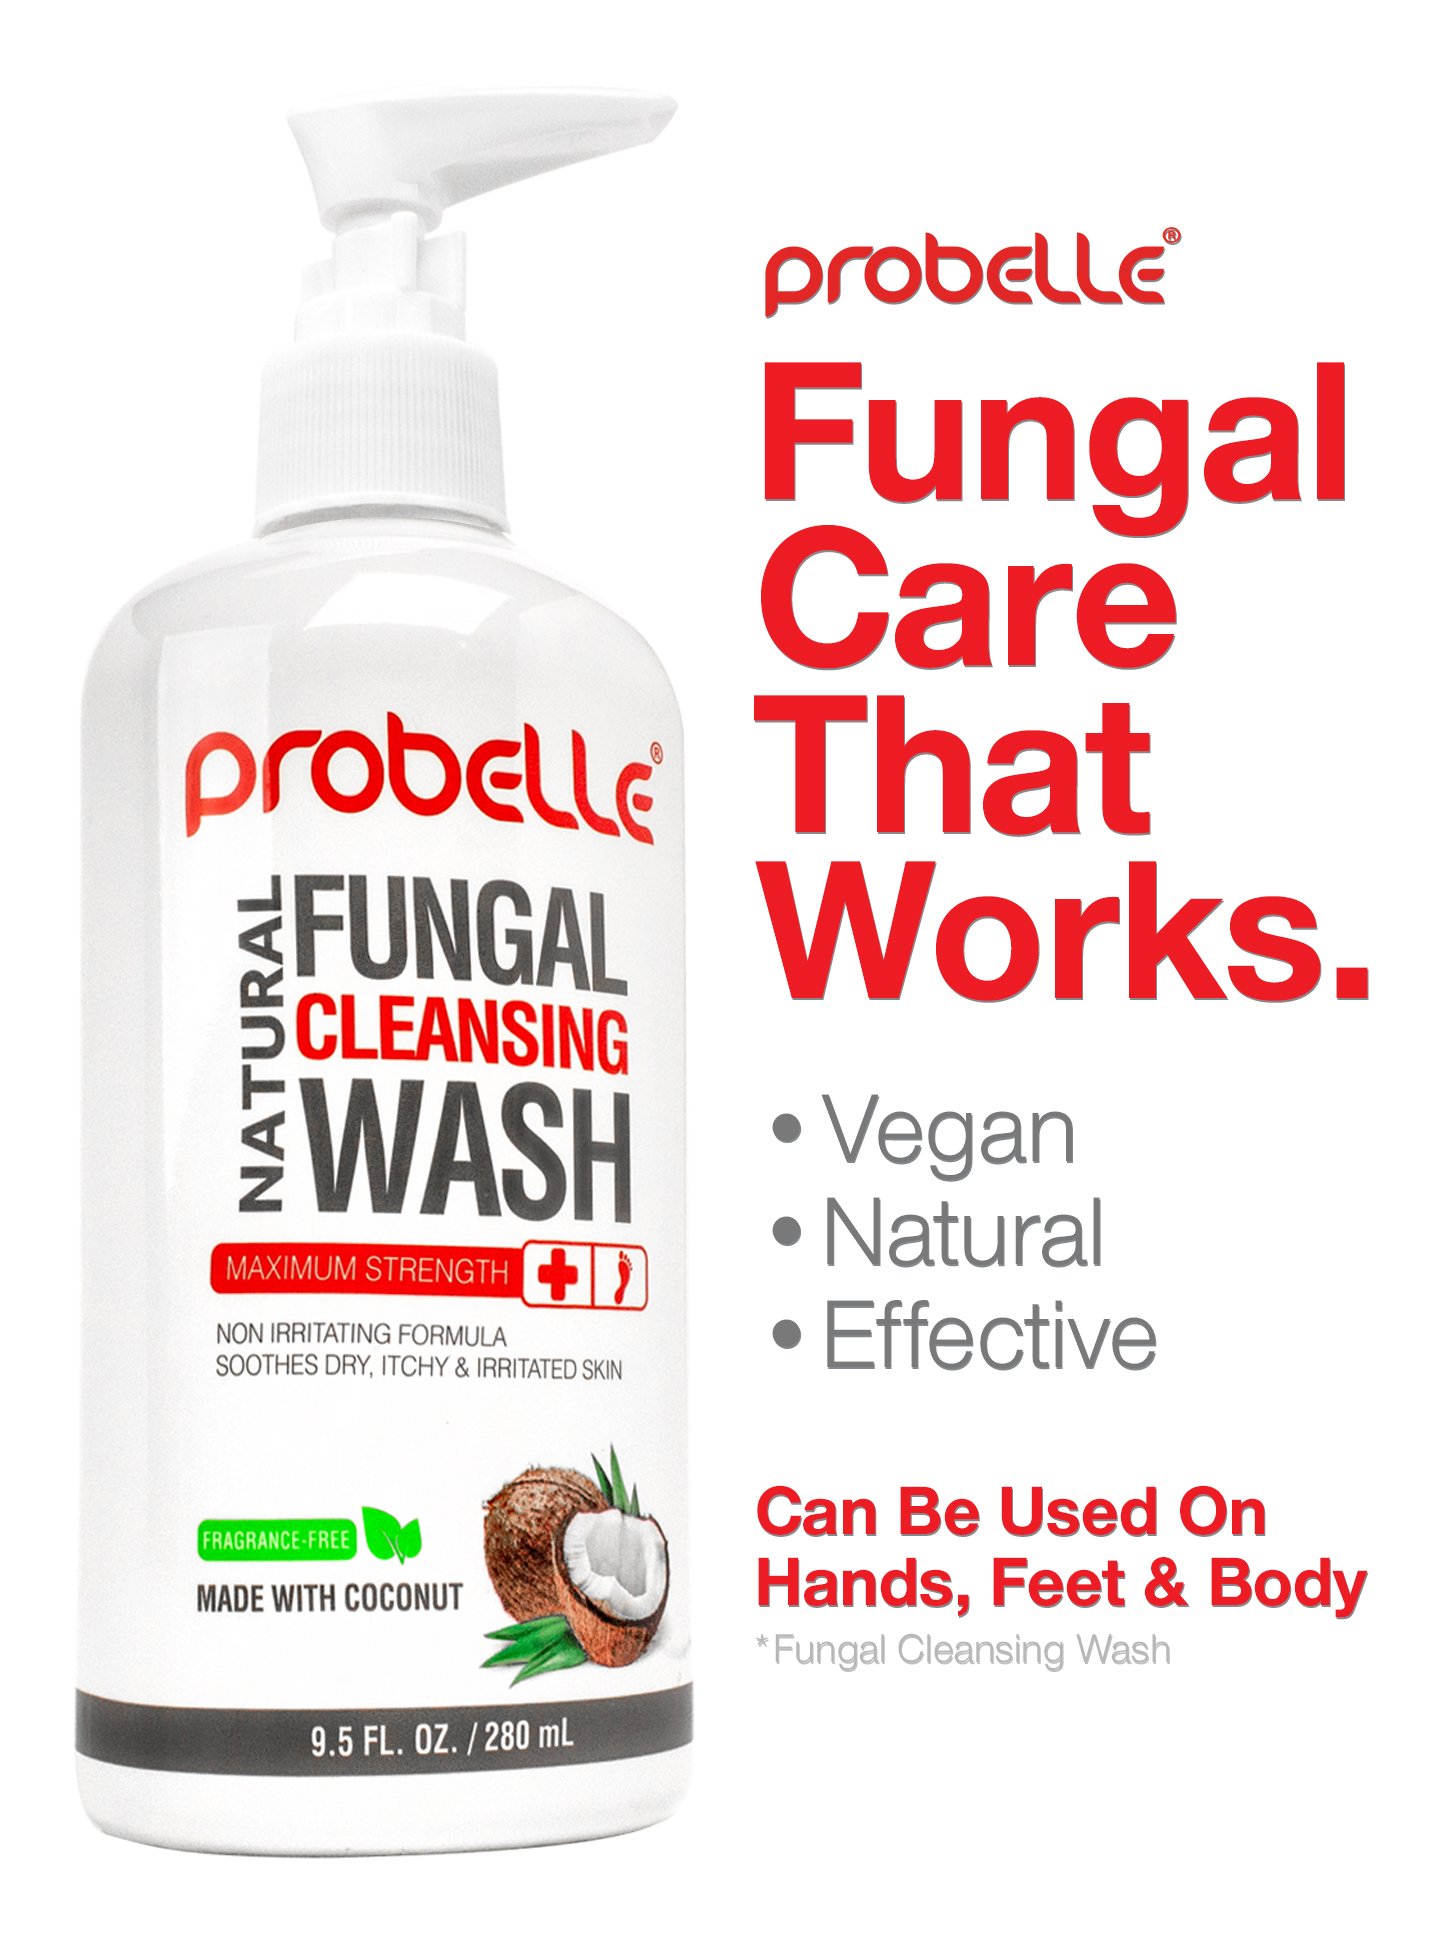 Fungal Care Products That Work